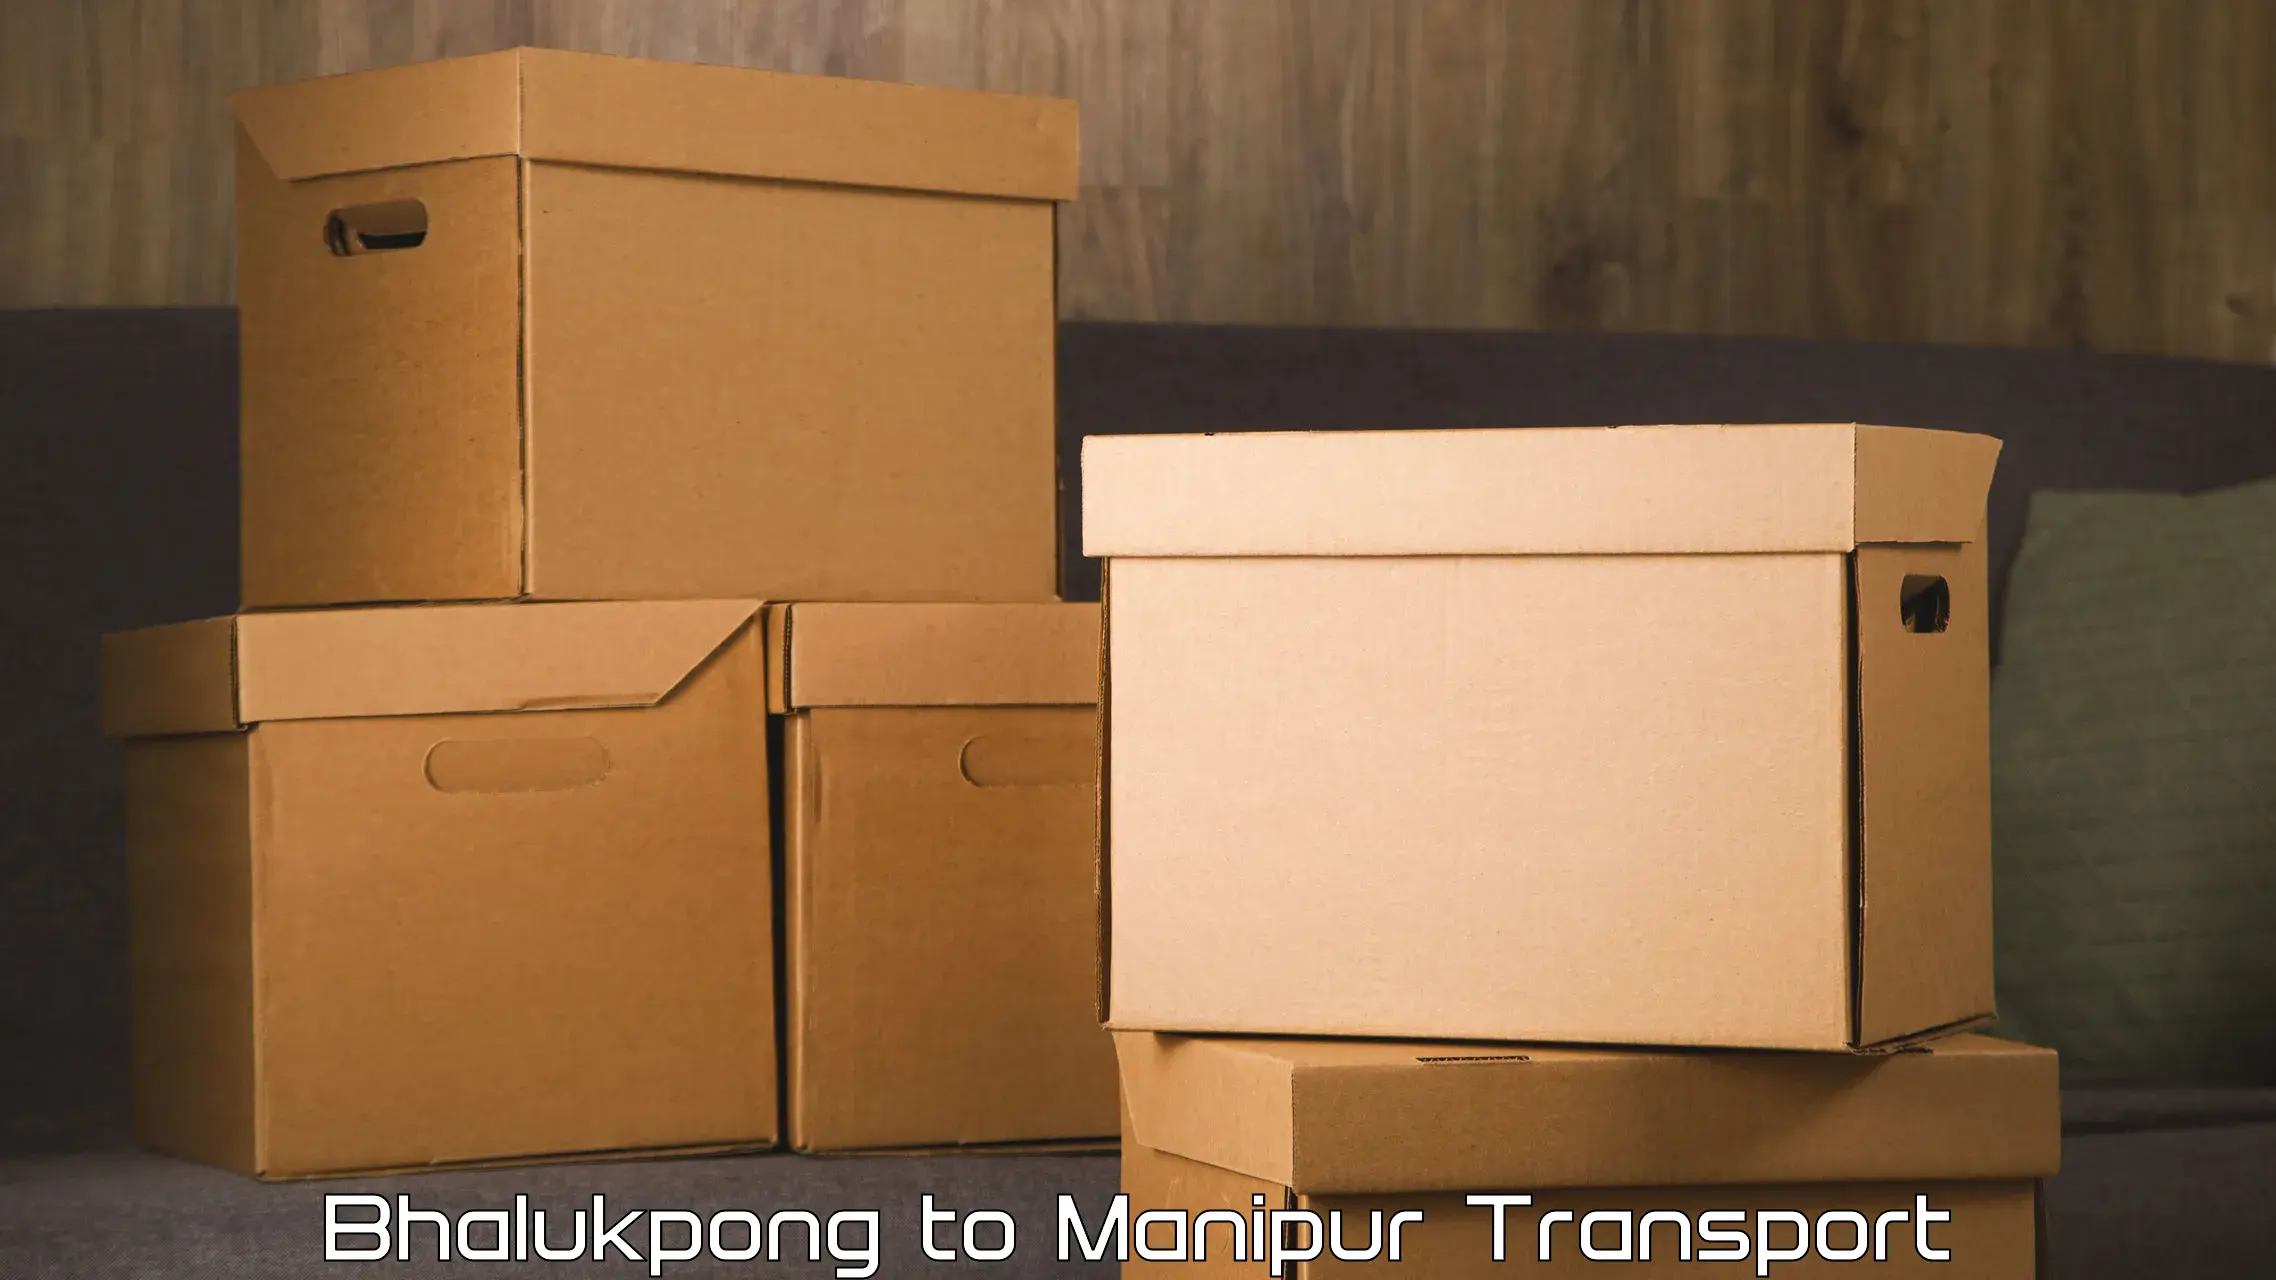 Truck transport companies in India Bhalukpong to Manipur